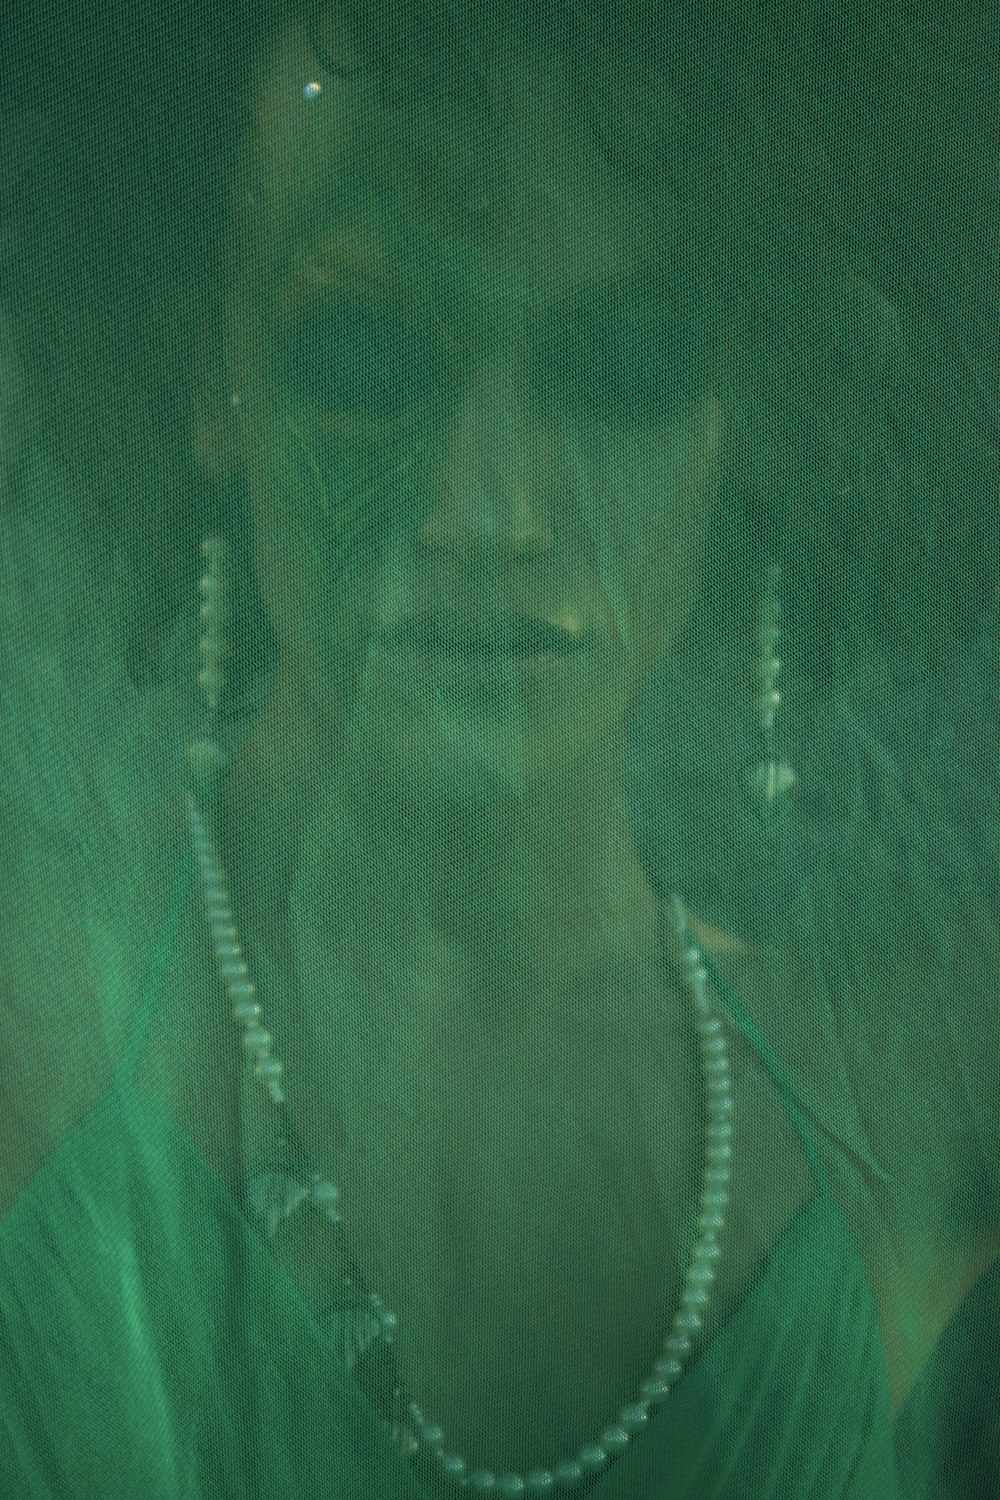 a woman in a green dress with pearls on her necklace